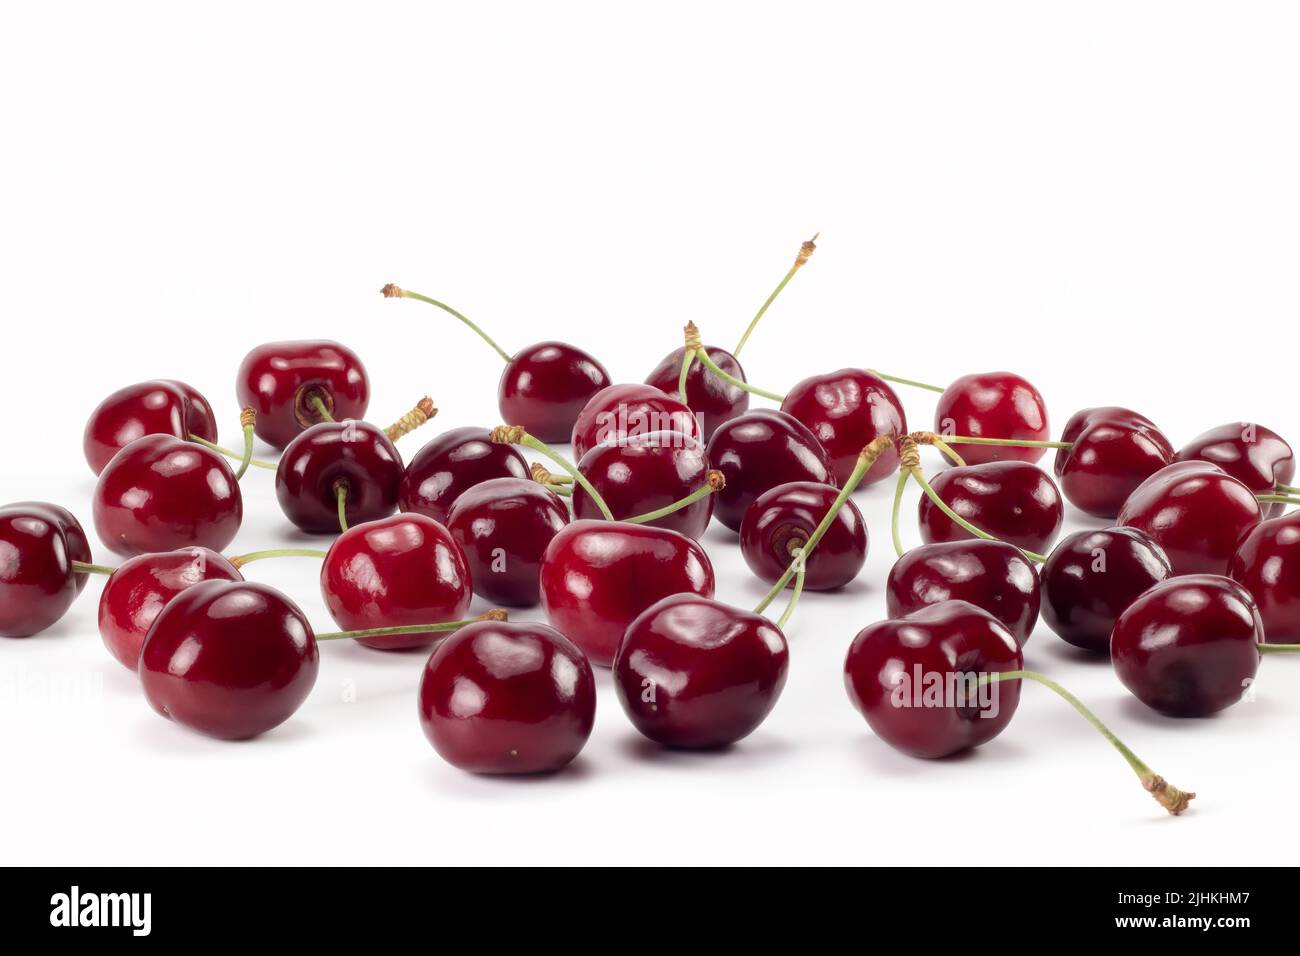 A lot of ripe cherries scattered on bright background. Close up view. Stock Photo